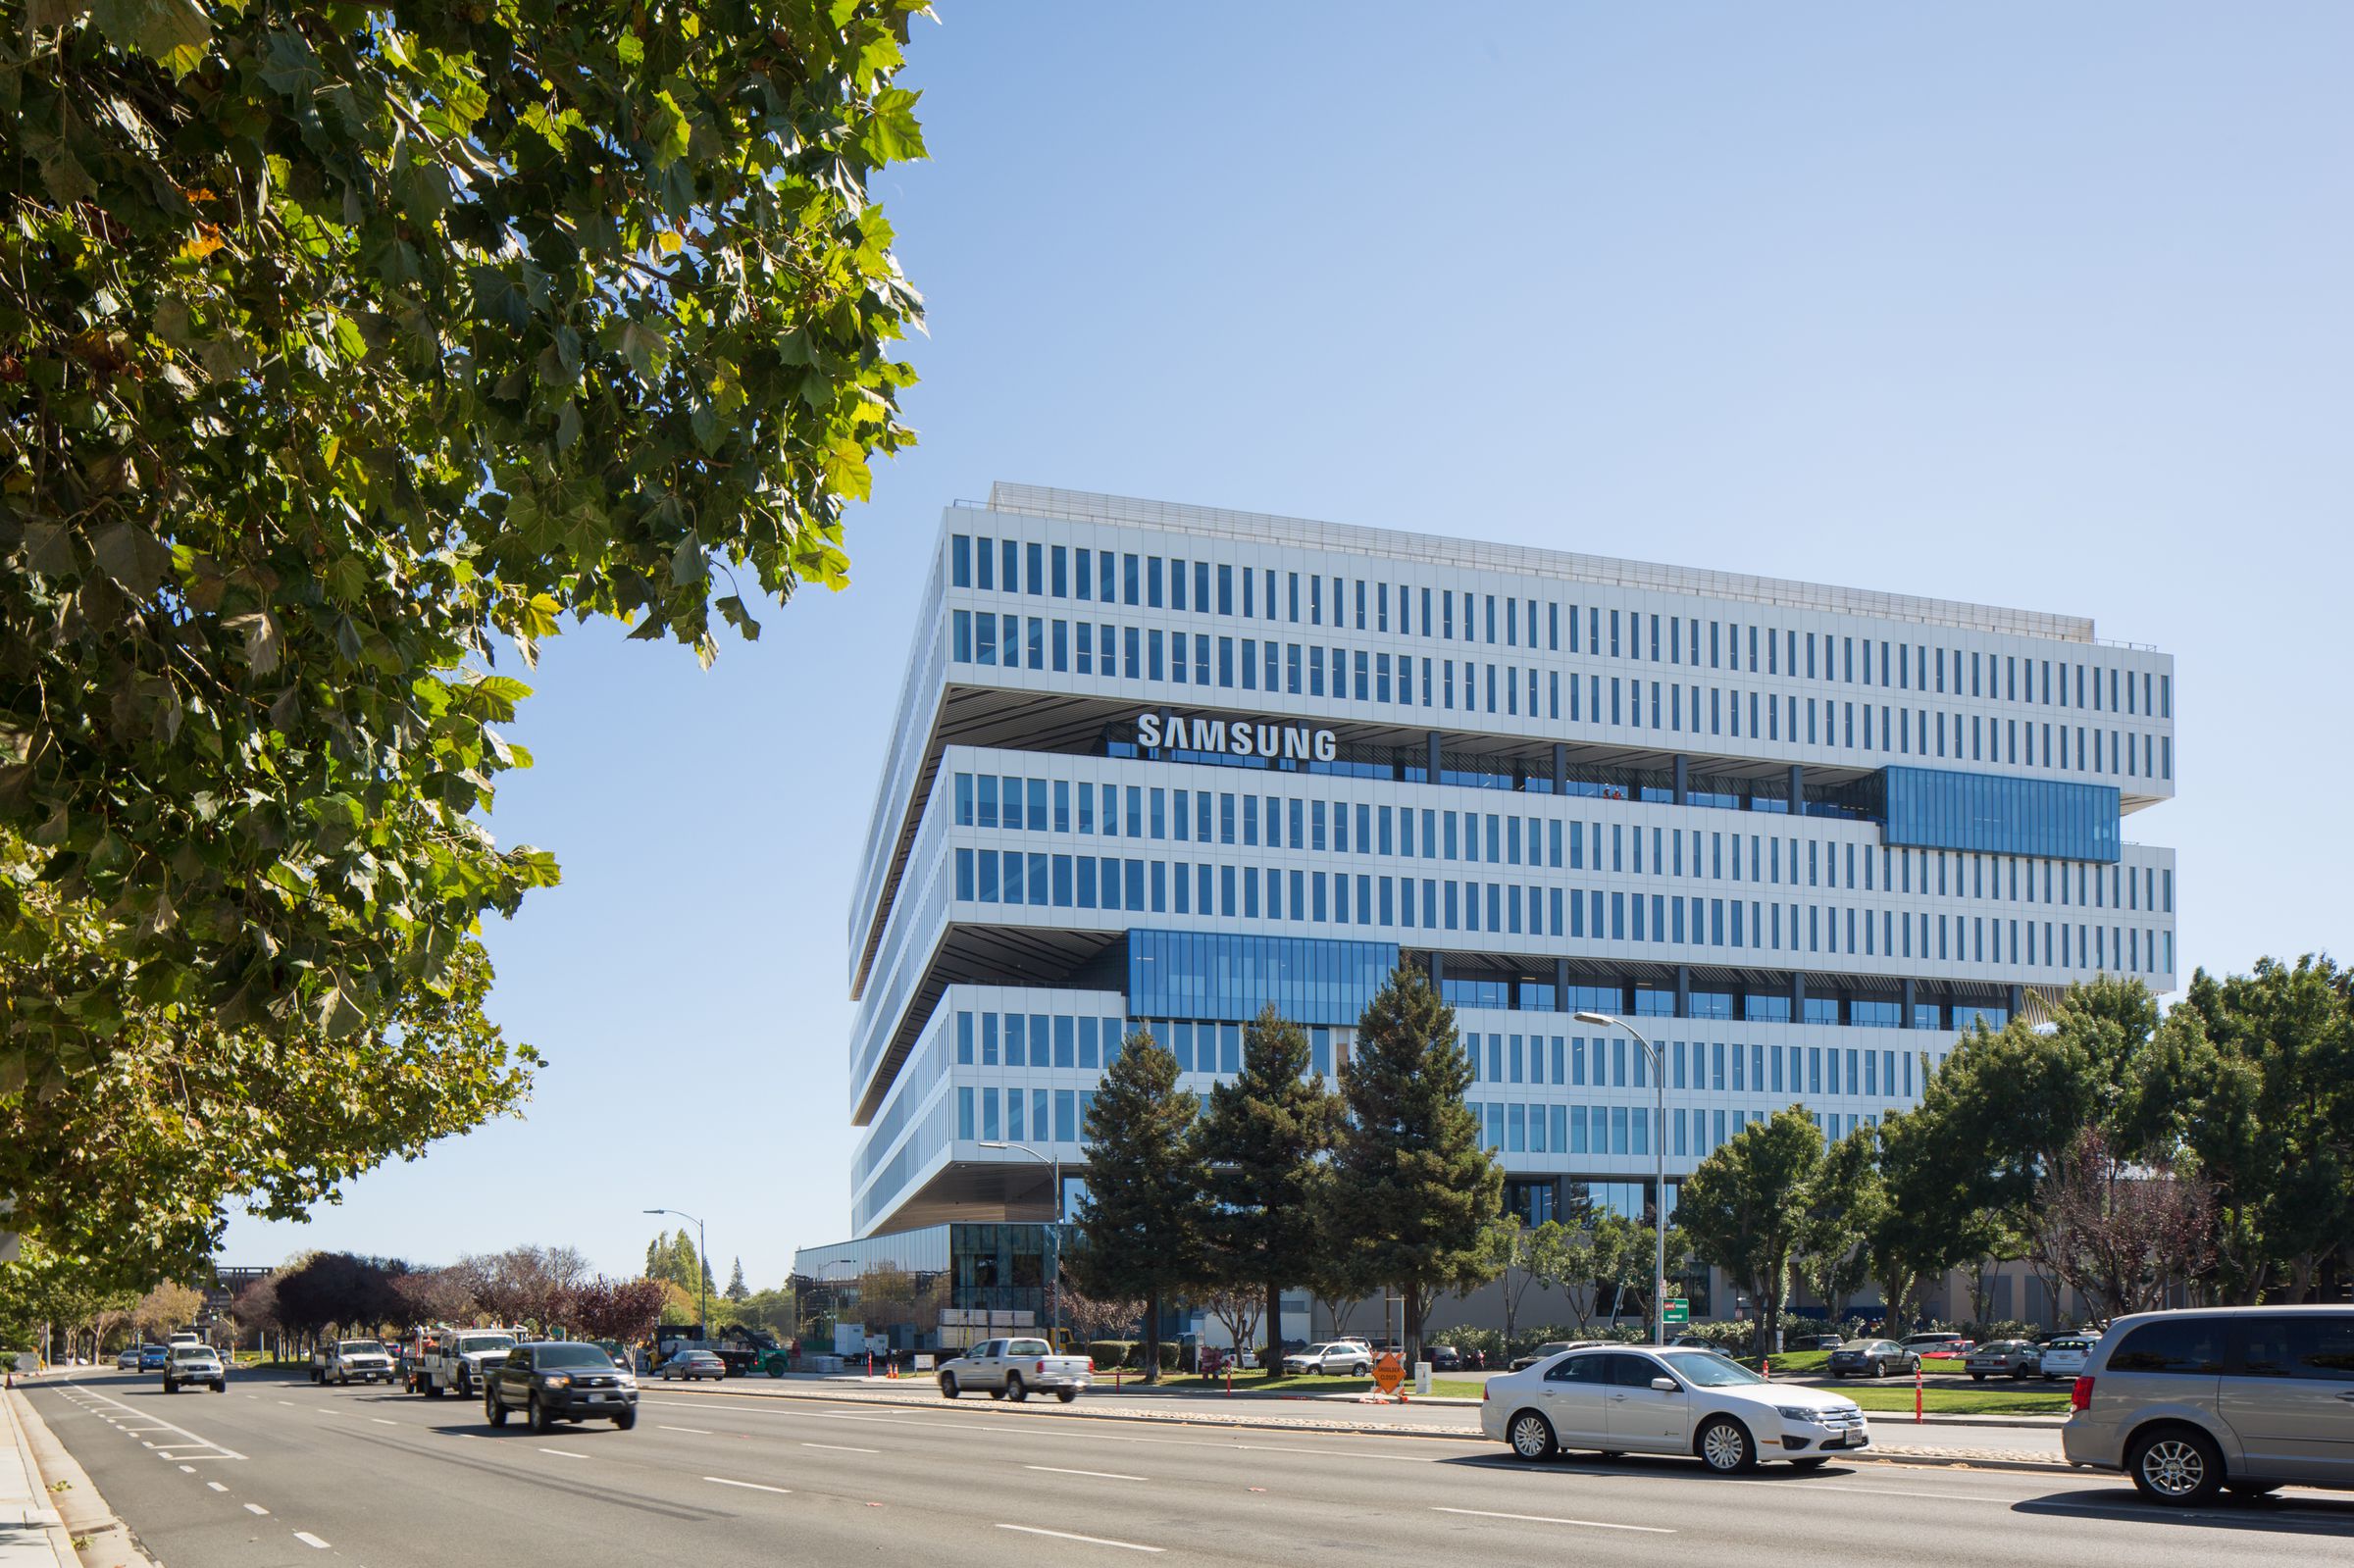 Samsung's new Silicon Valley offices